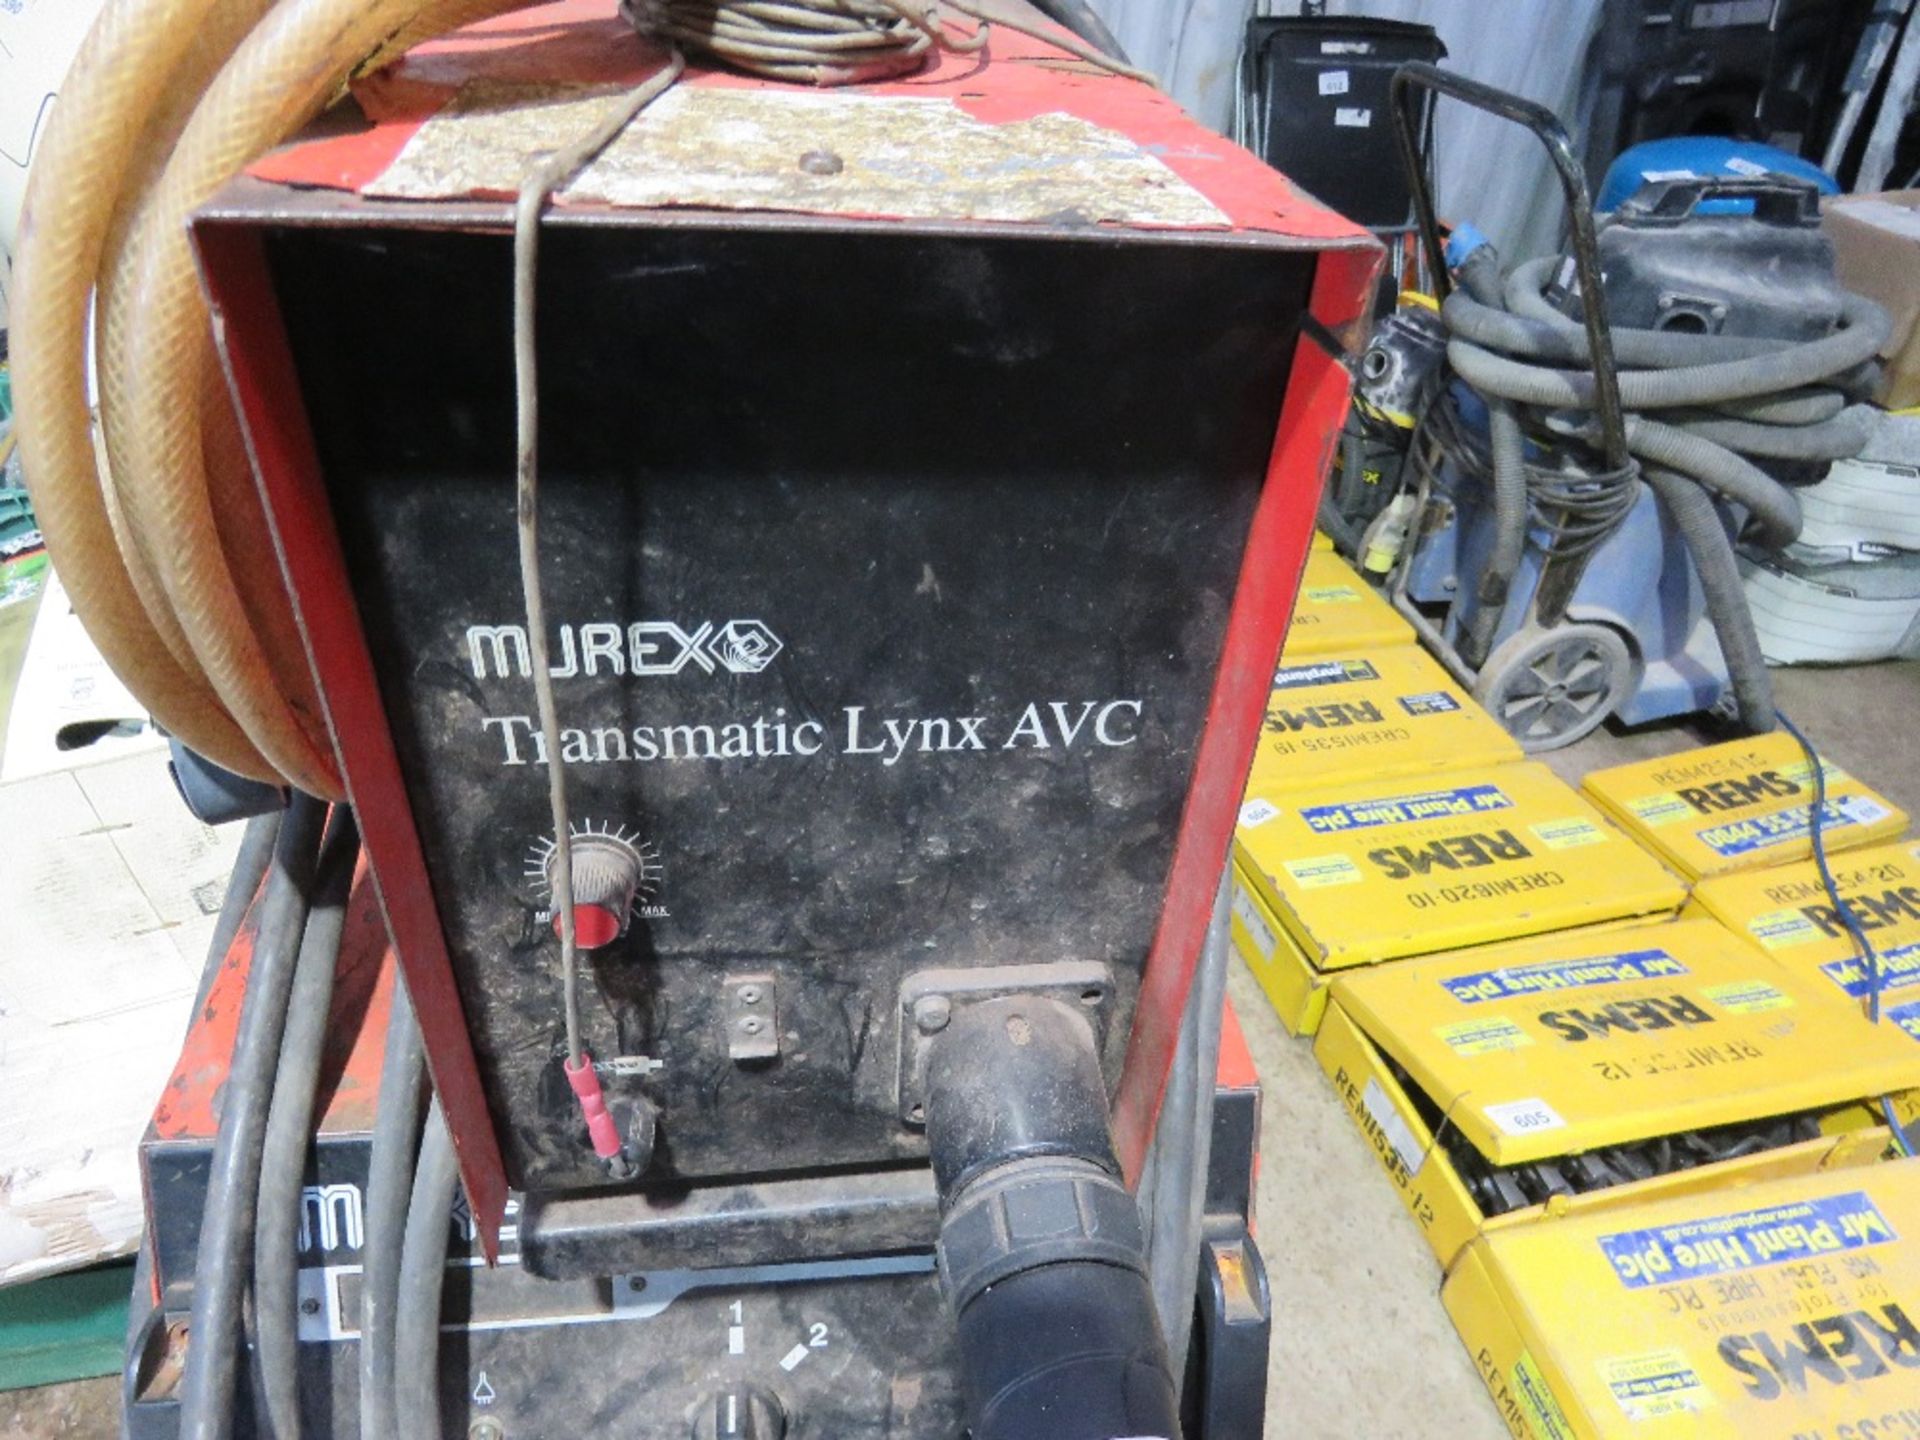 MUREX CHALLENGER 301T MIG WELDER WITH WIRE FEED UNIT, 240VOLT POWERED. THIS LOT IS SOLD UNDER THE - Image 4 of 7